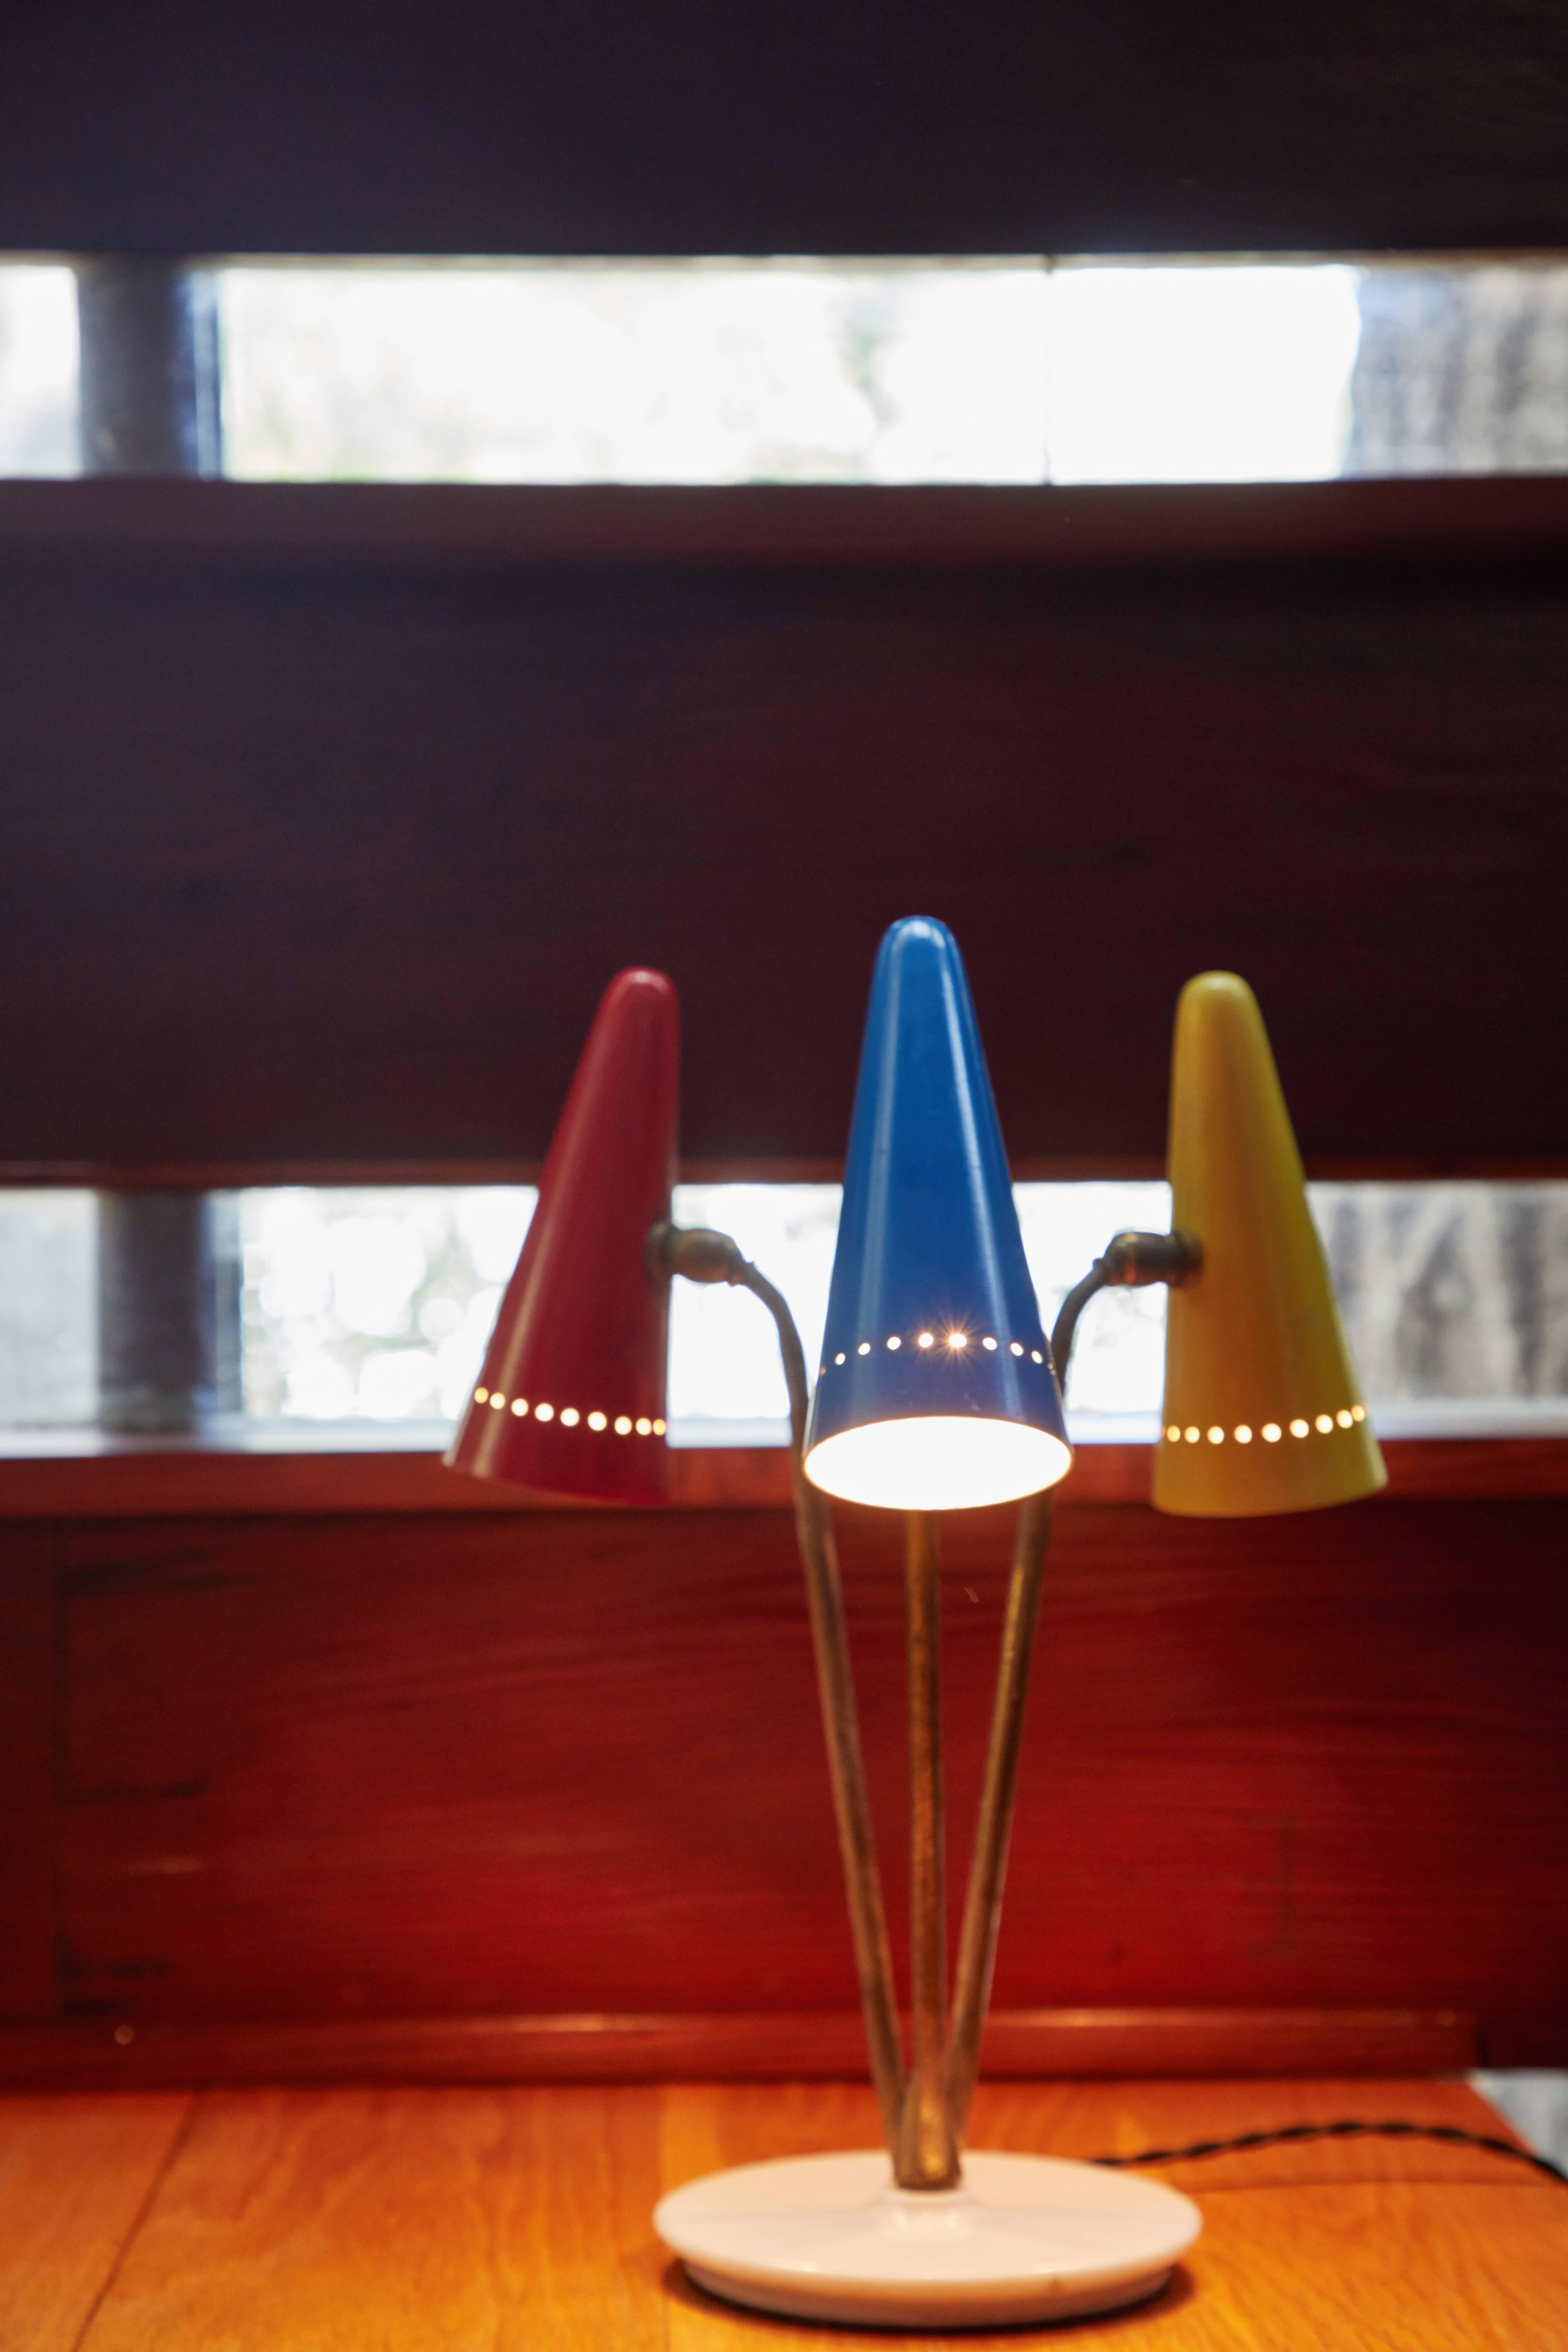 Rare 1950s Arteluce Tricolore table lamp. This extremely rare and iconic design executed in painted metal, brass and marble with original color in very good vintage condition. The individual cone shades rotate independently for a variety of lighting